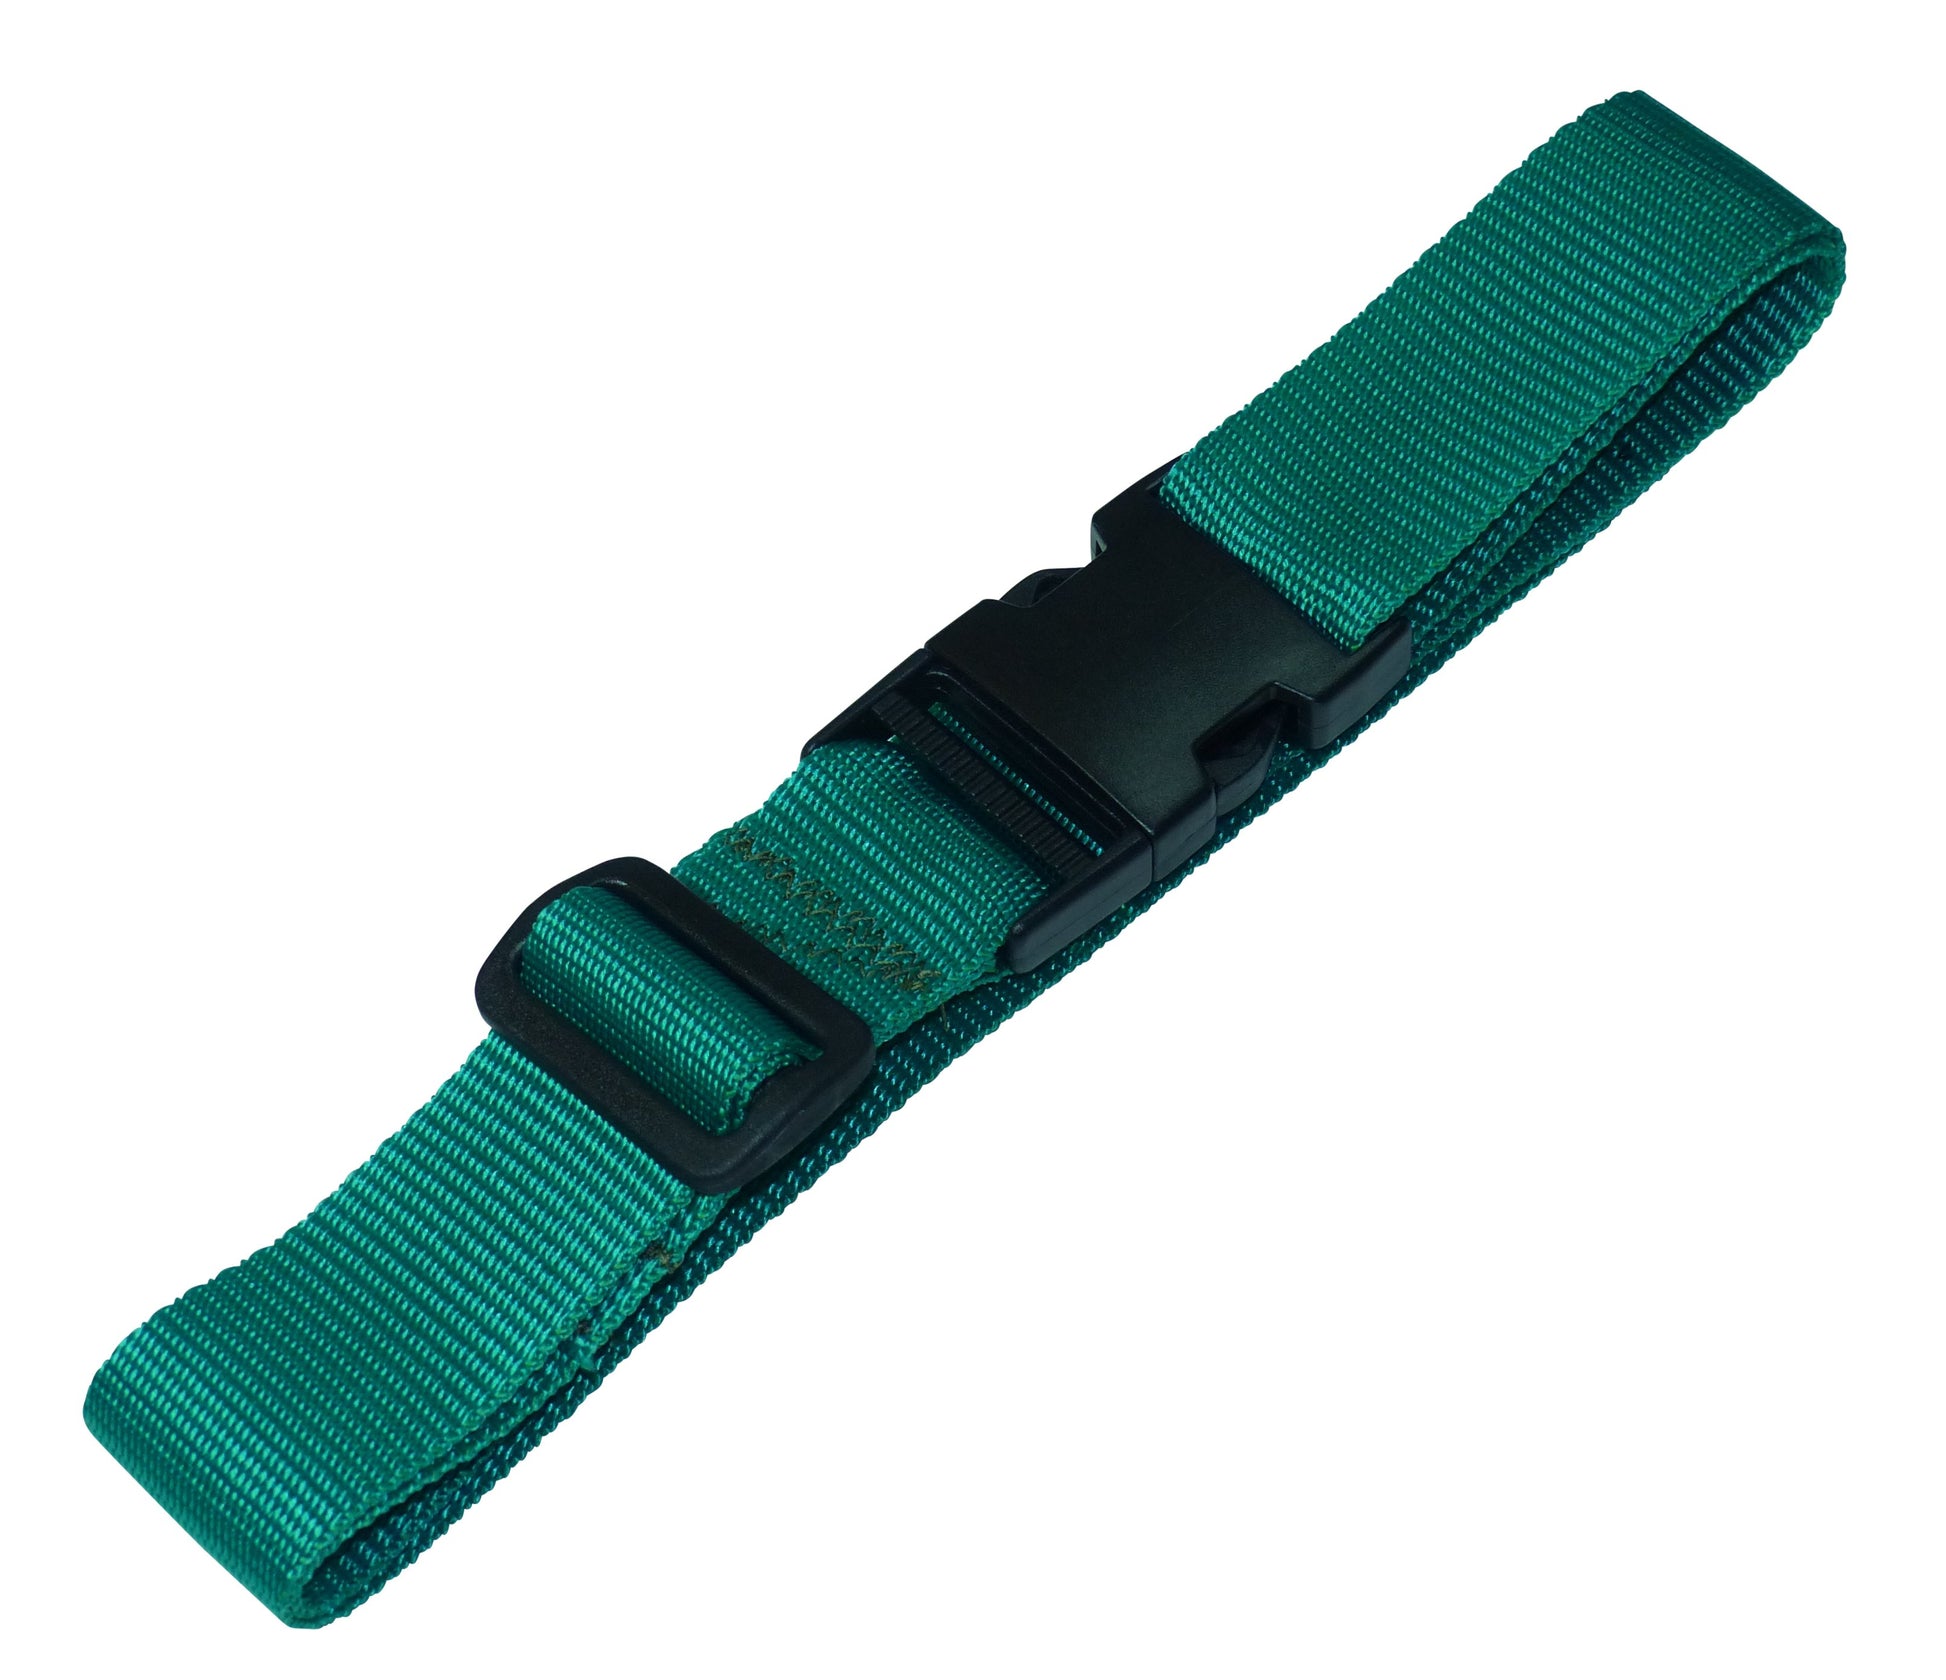 Benristraps 38mm Webbing Strap with Quick Release & Length-Adjusting Buckles in emerald